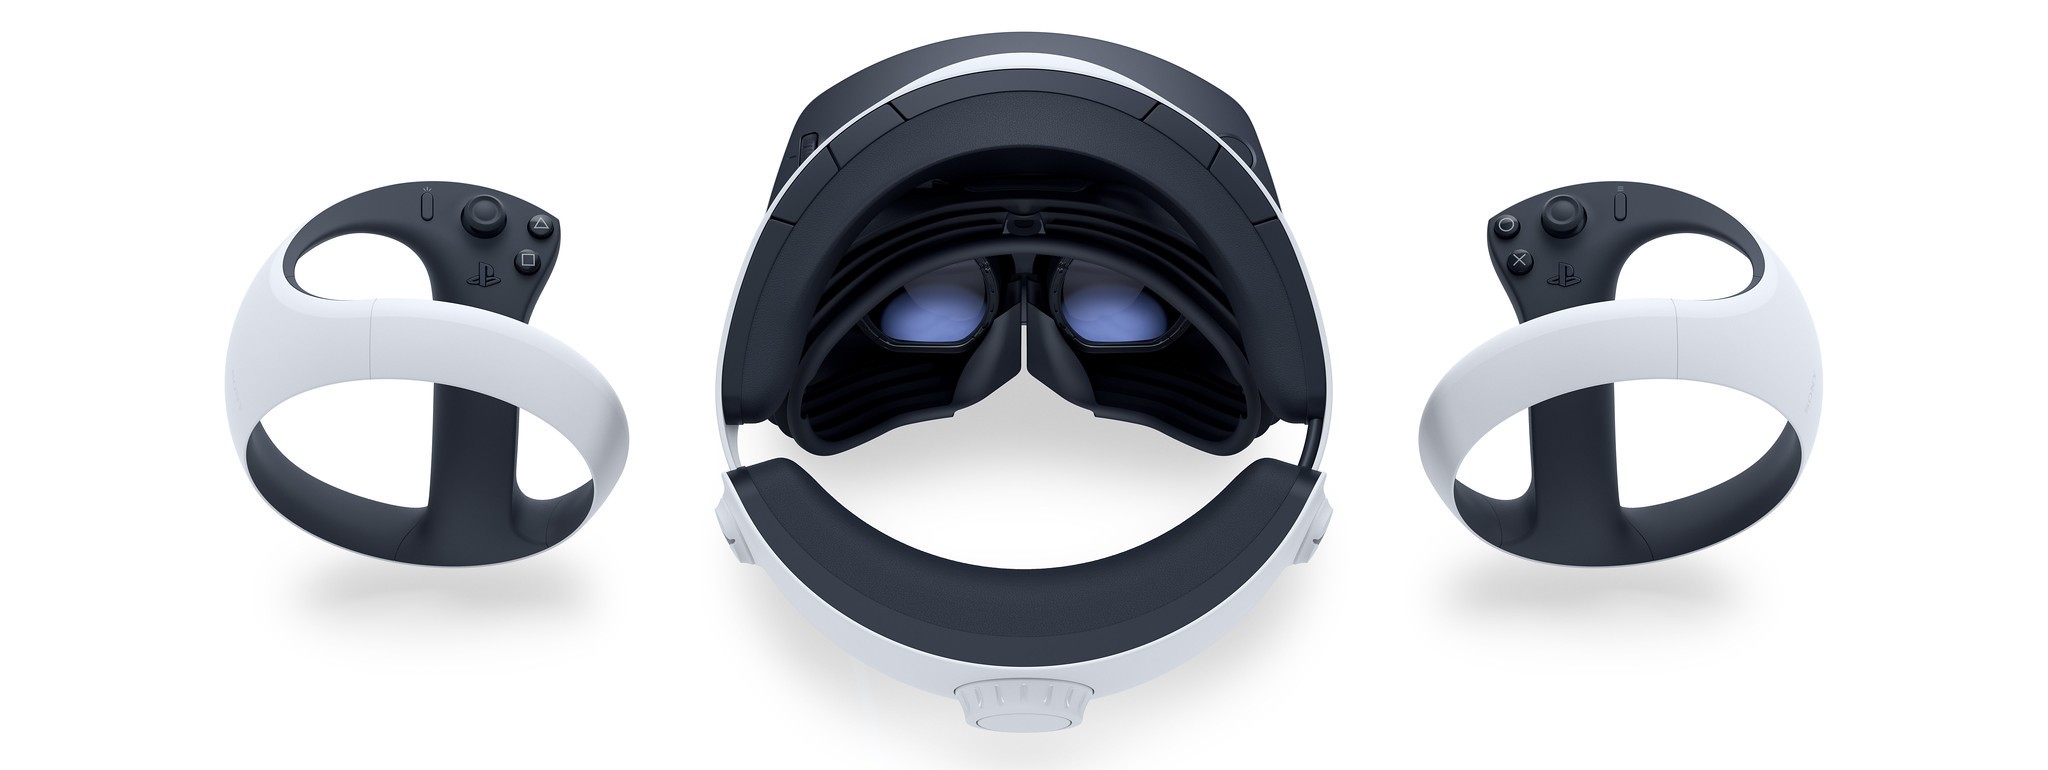 Top-down view of the PlayStation VR2 headset into the VR lenses inside.